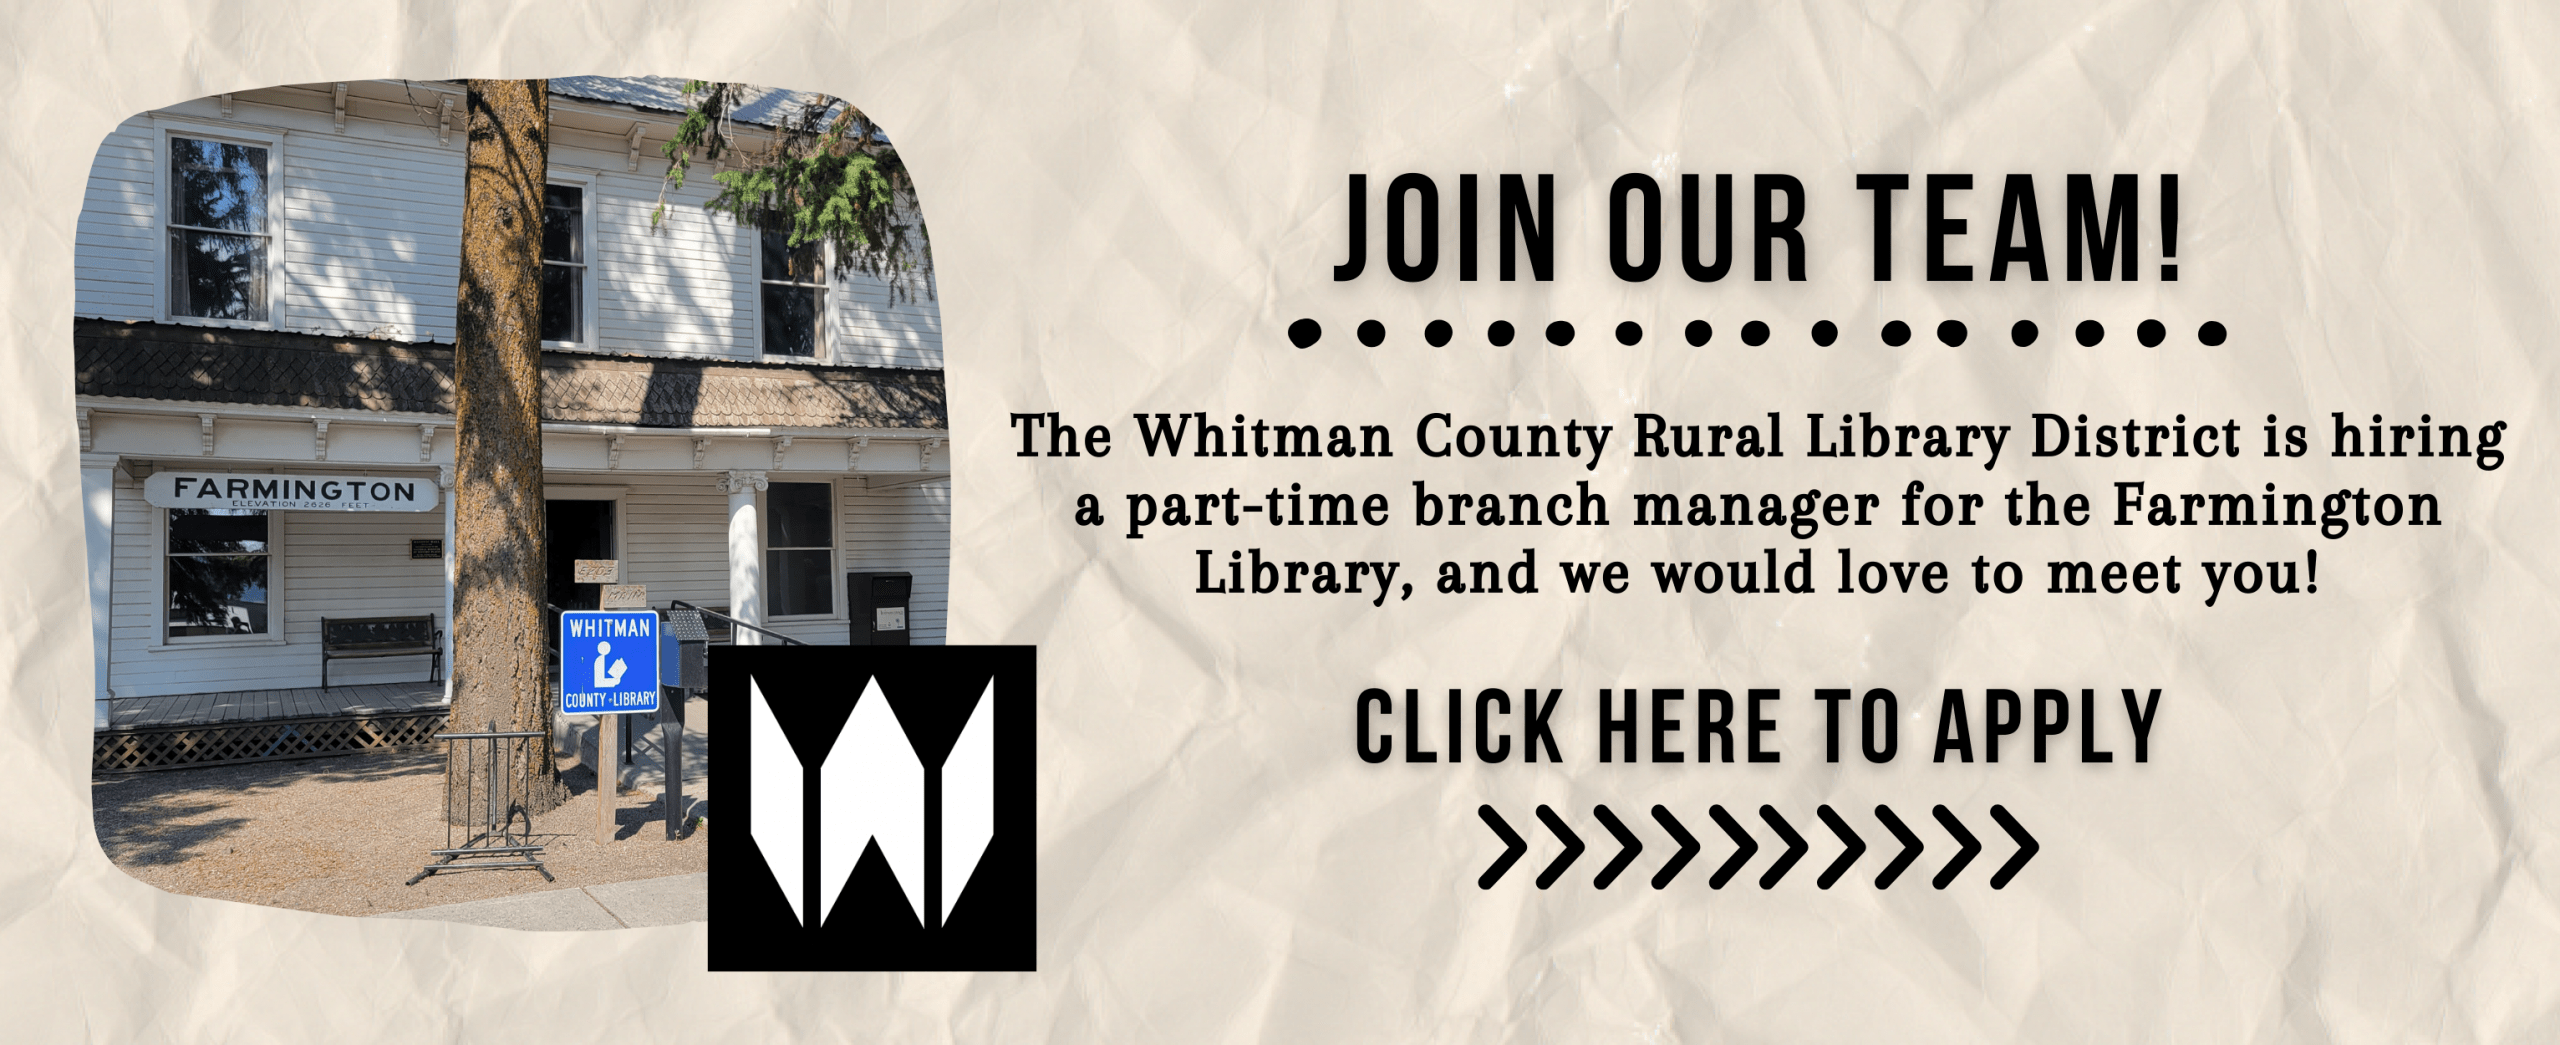 Join our team! The Whitman County Rural Library District is hiring a part-time branch manager for the Farmington Library, & we would love to meet you! Click here to apply.